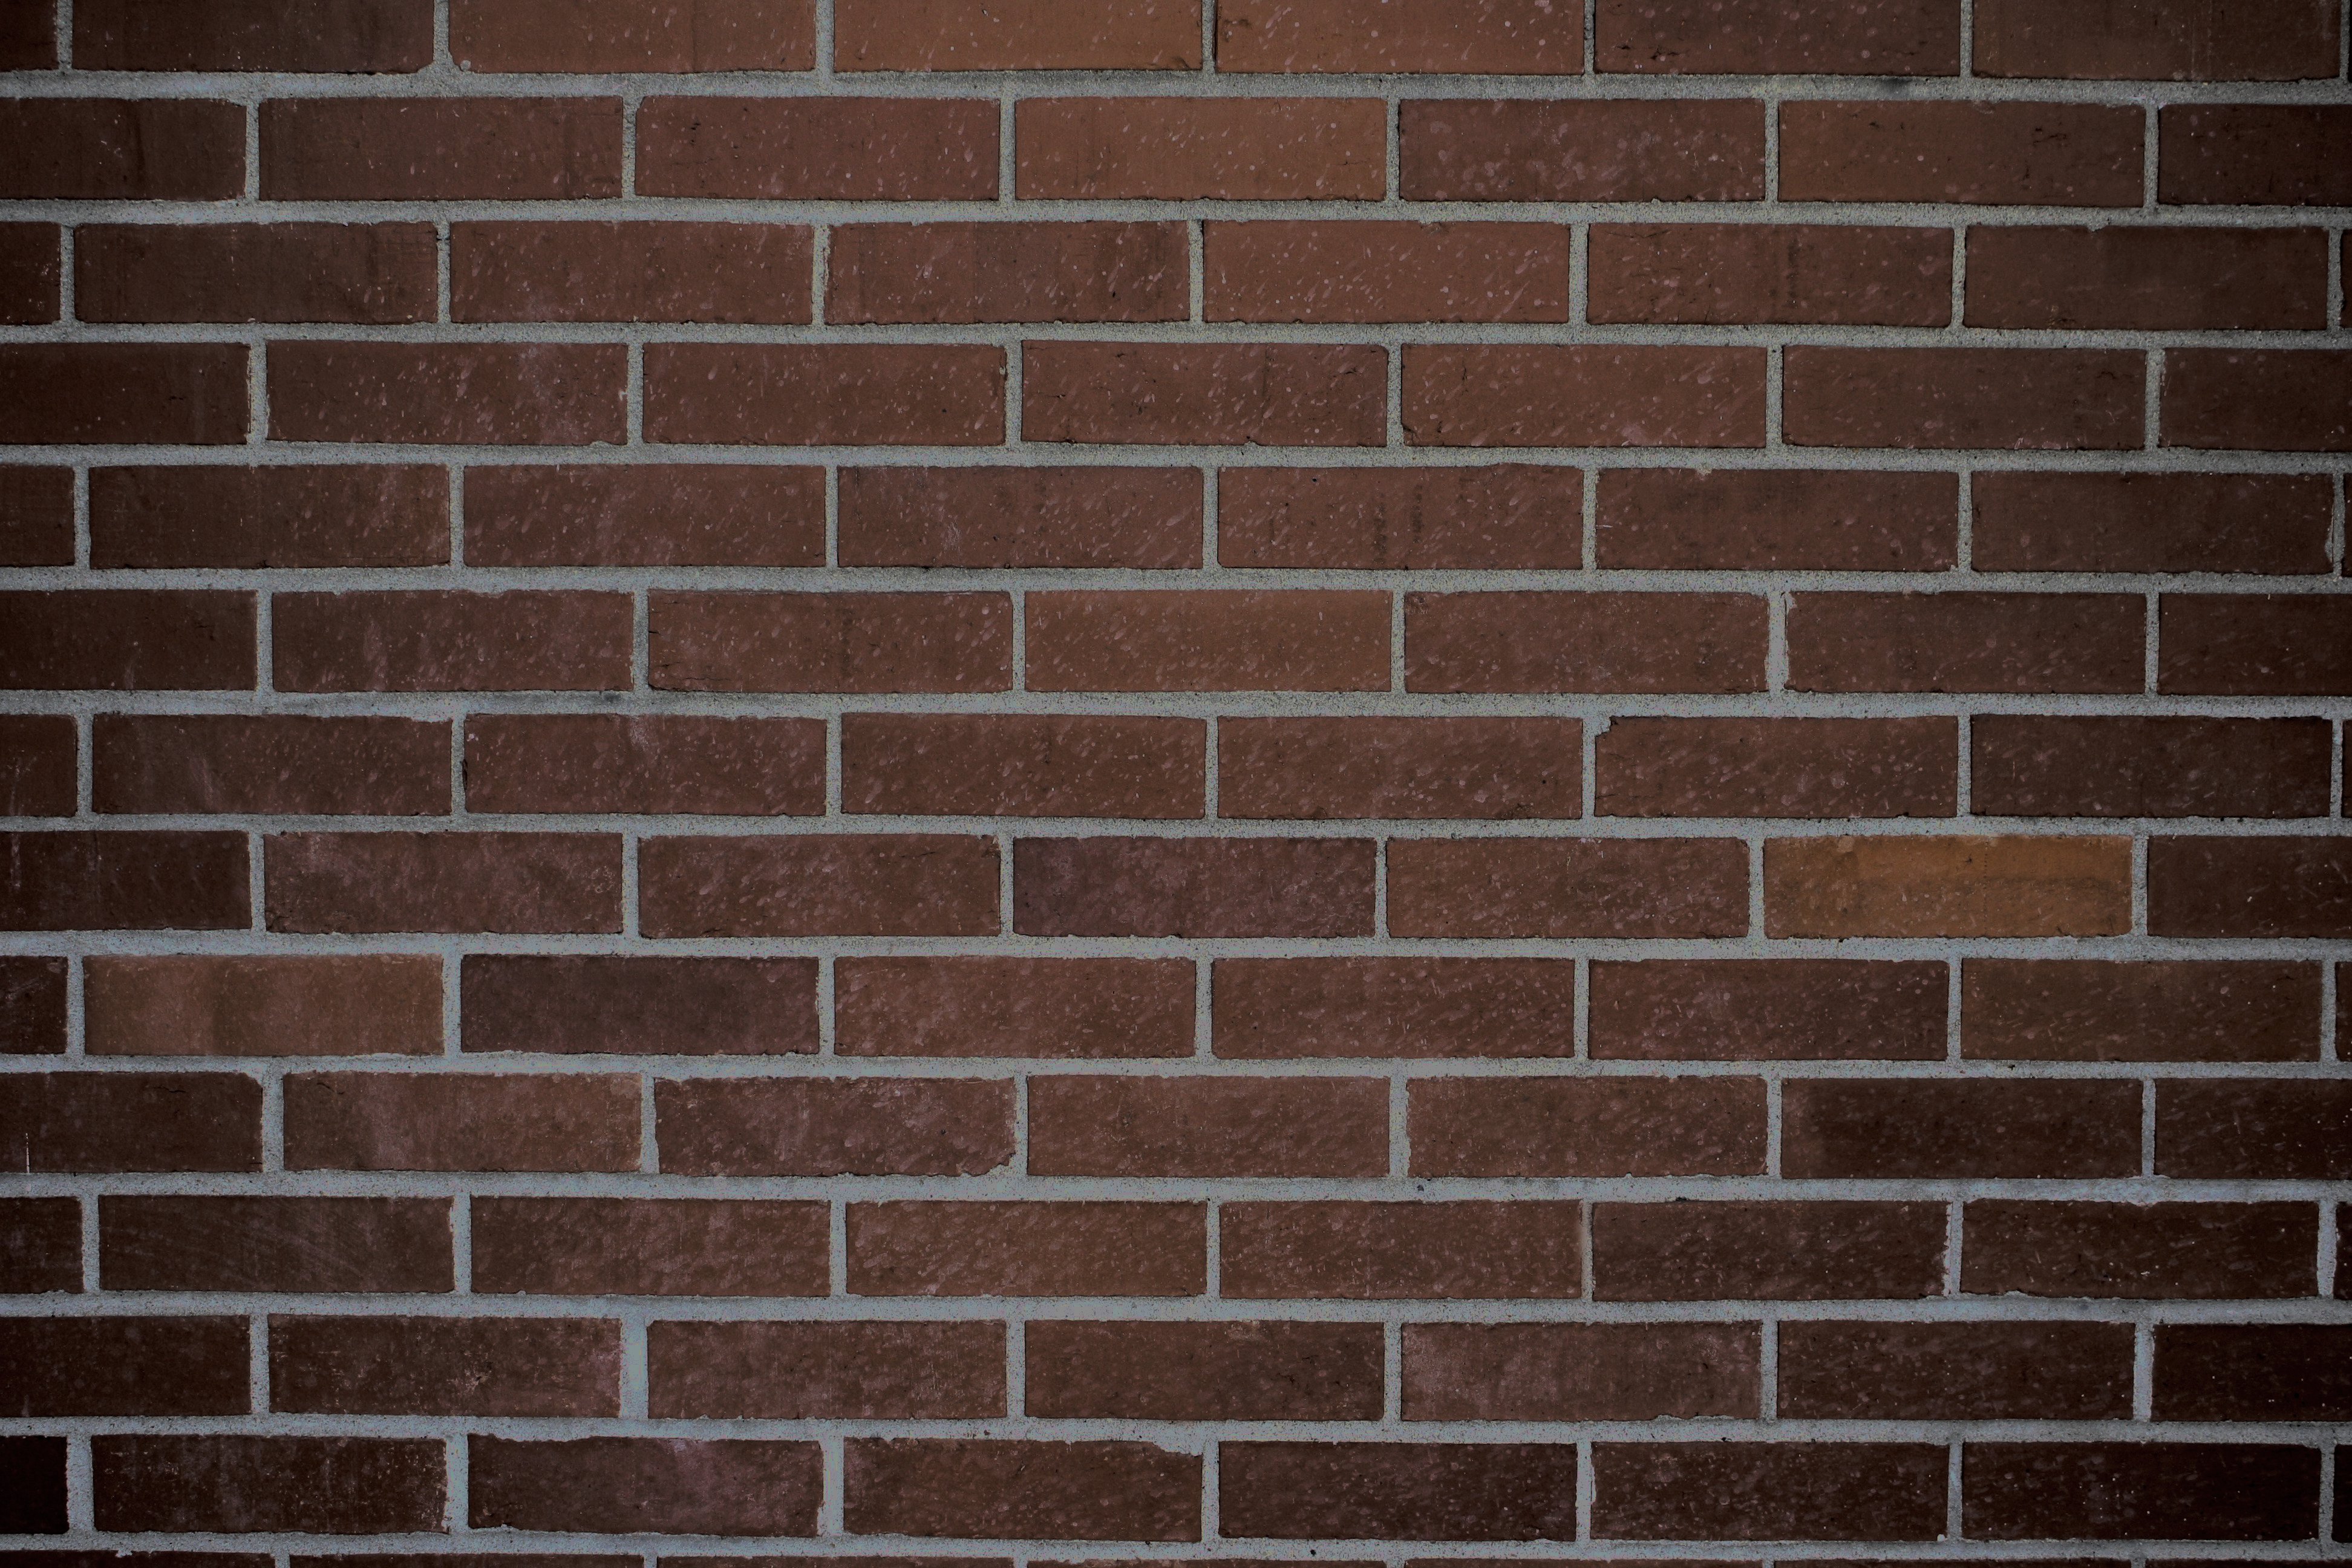 Dark Brown Brick Wall Texture Picture | Free Photograph | Photos ...